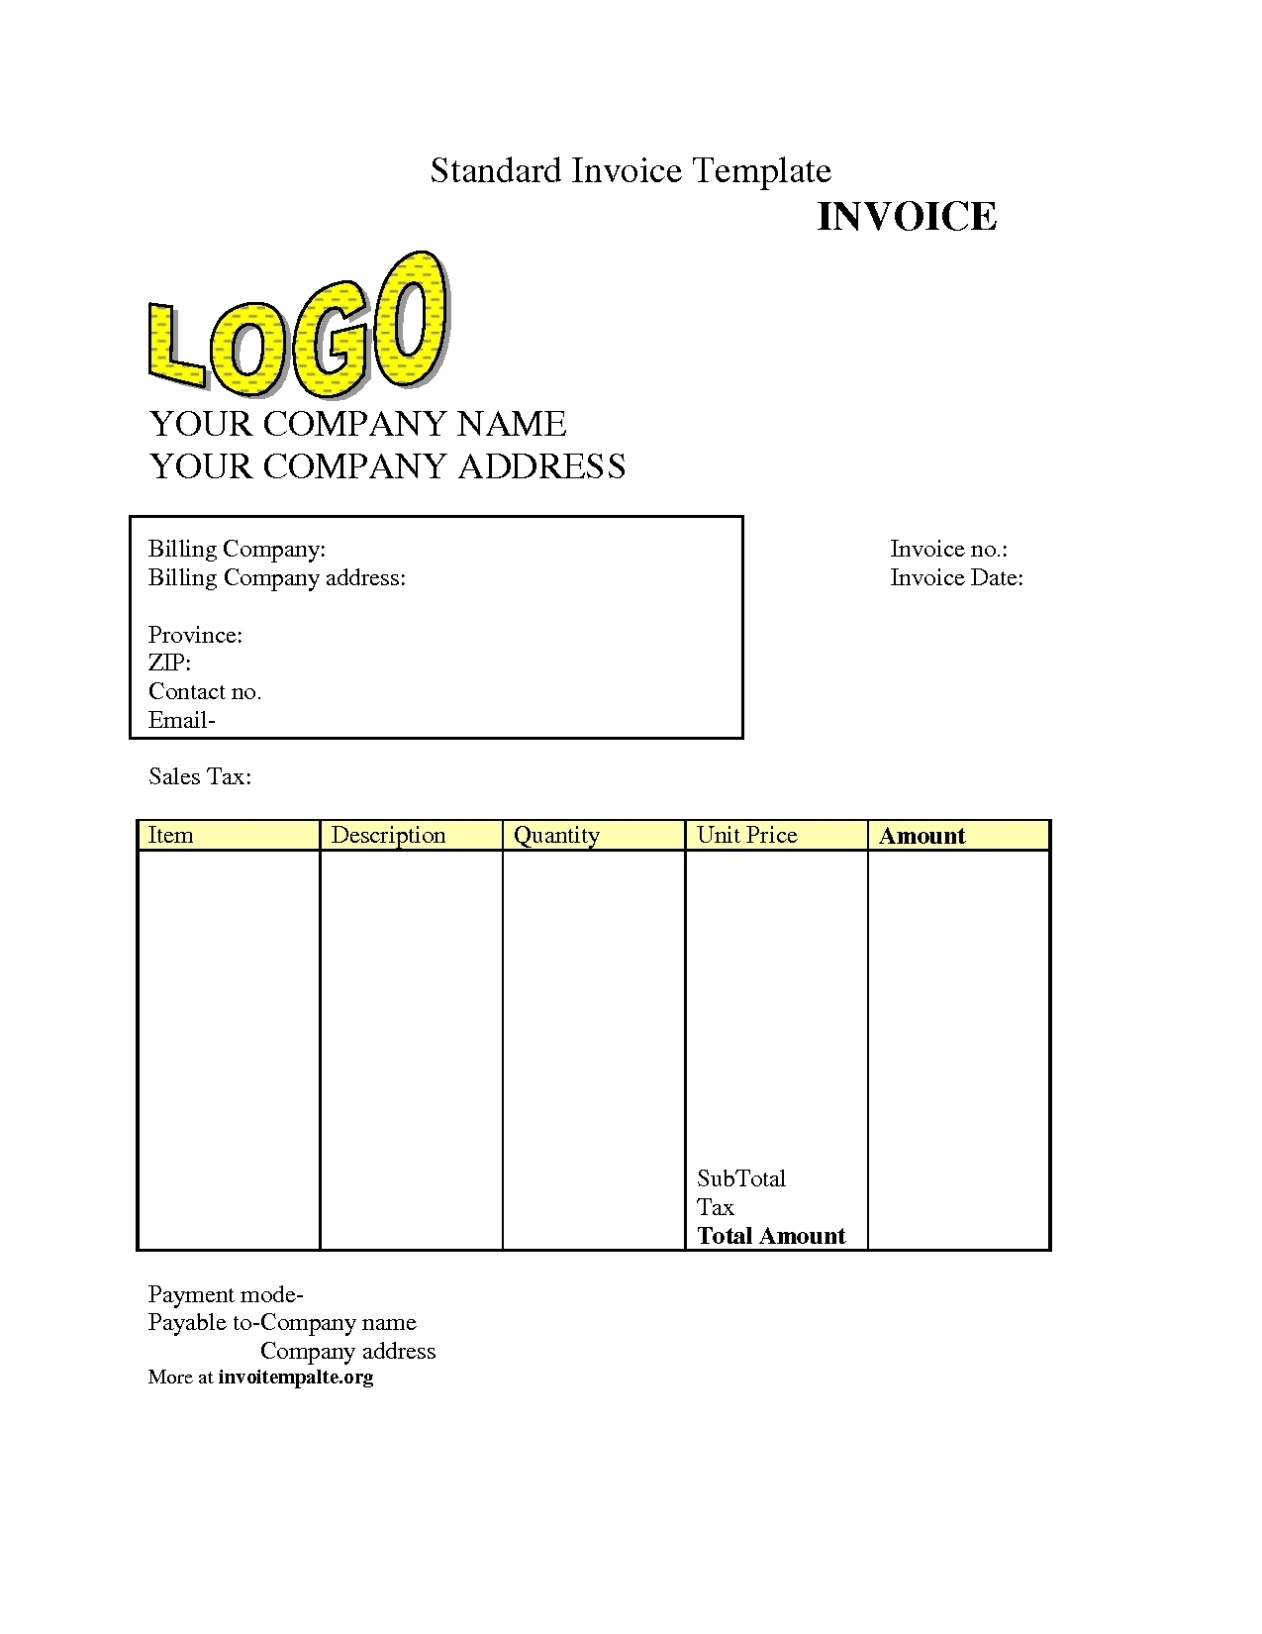 Free Downloadable Invoices * Invoice Template Ideas Intended For Free Downloadable Invoice Template